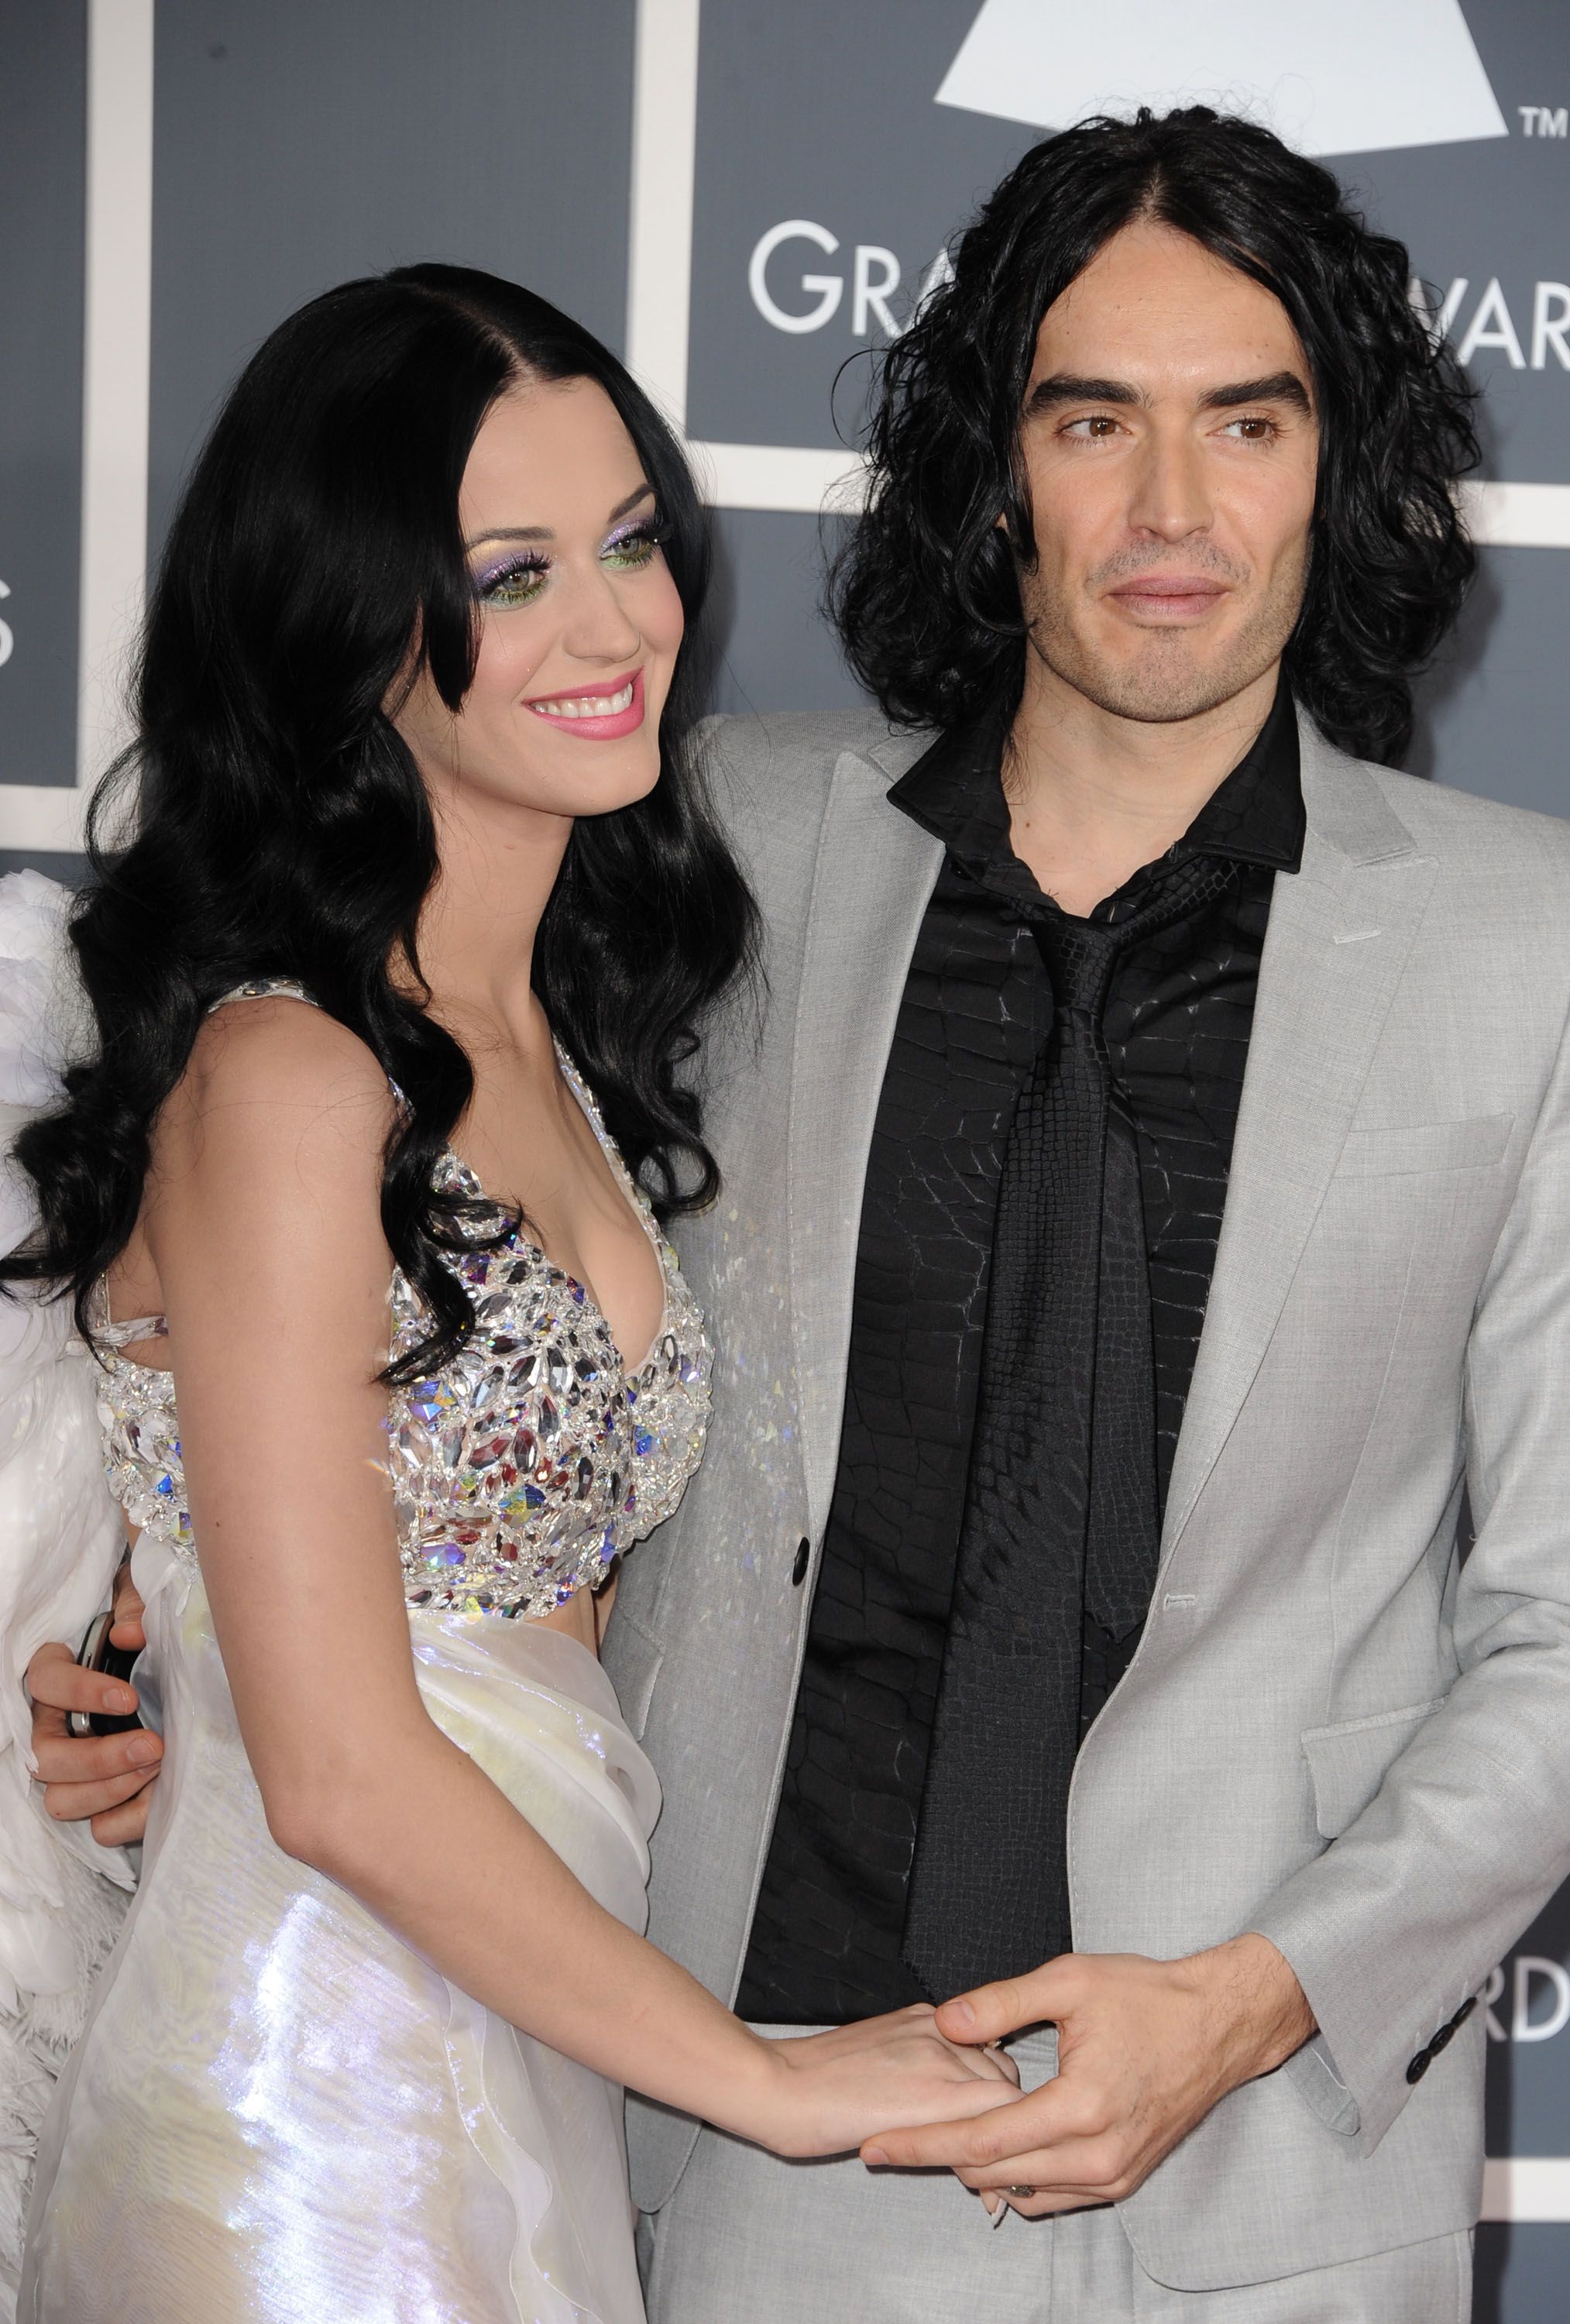 Katy Perry and Russell Brand at the 53rd Annual Grammy Awards in 2011 in Los Angeles, California | Source: Getty Images